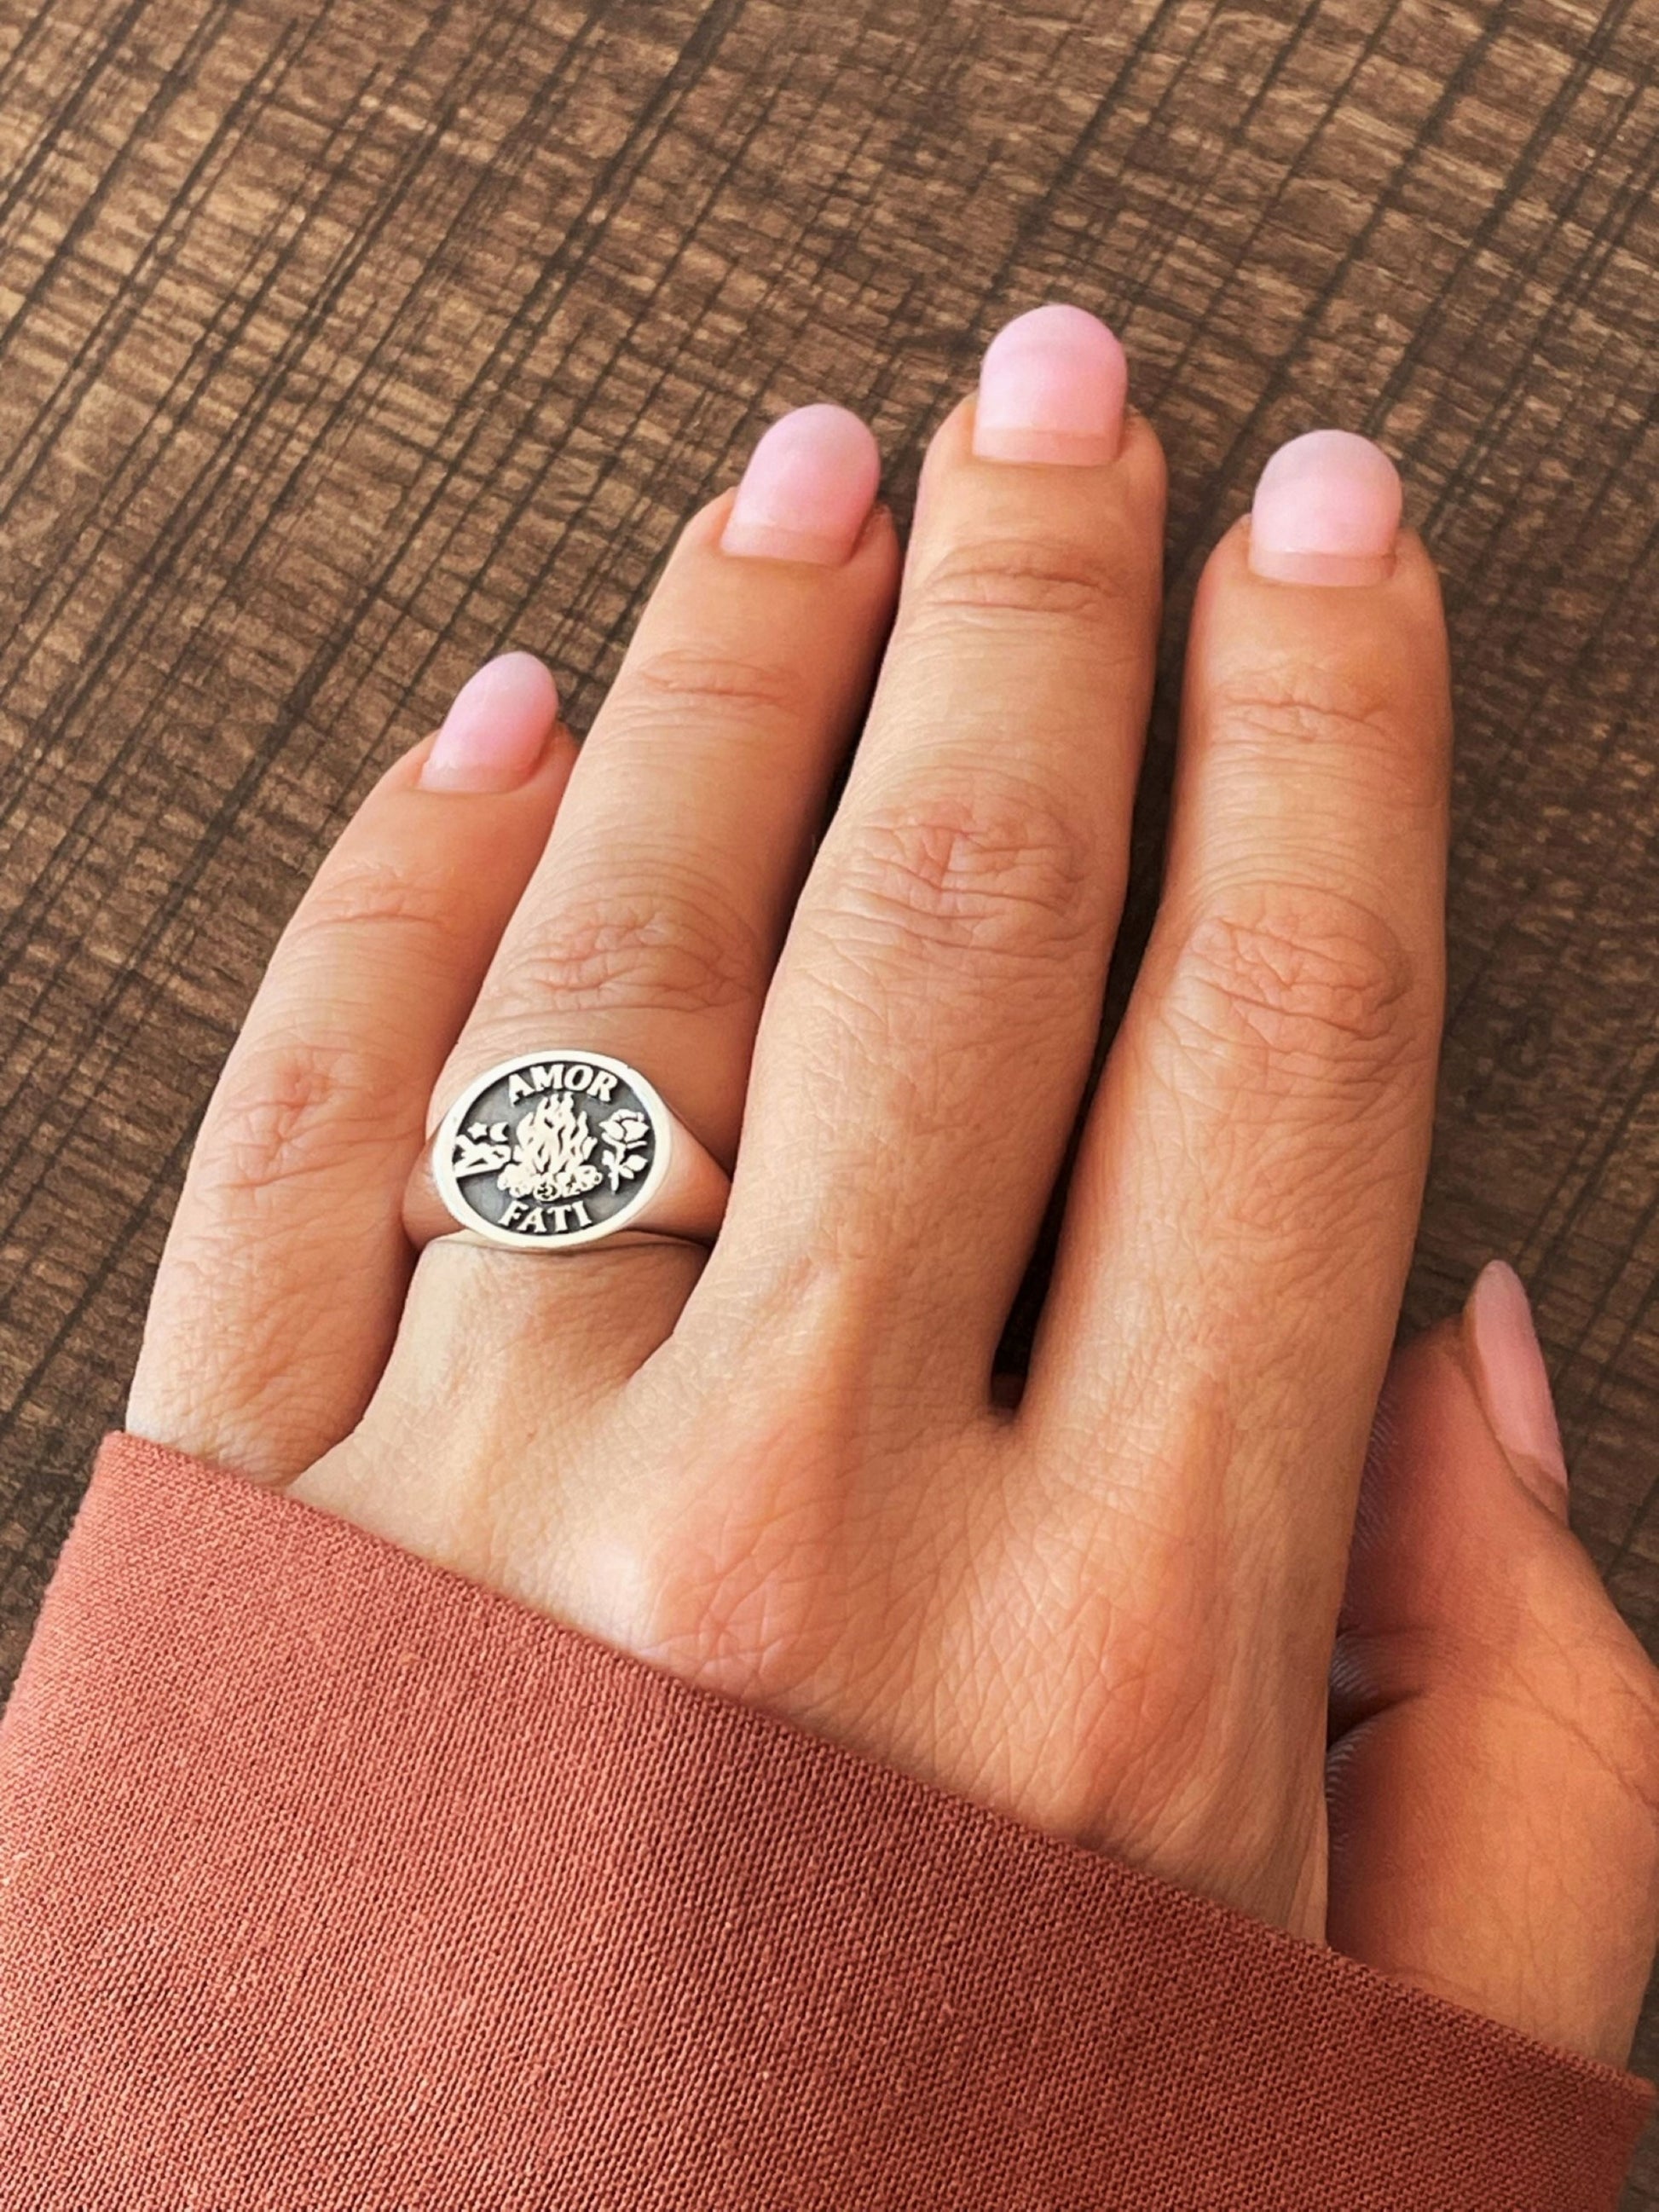 Amor Fati Ring, Amor Fati Fate Ring, Fati Ring, Amor – Love of with Jewelry, Fati Meaningful Fate Ring, Jewelry Signet Jewelry, Meaning, Amor somethinggoldjewelry